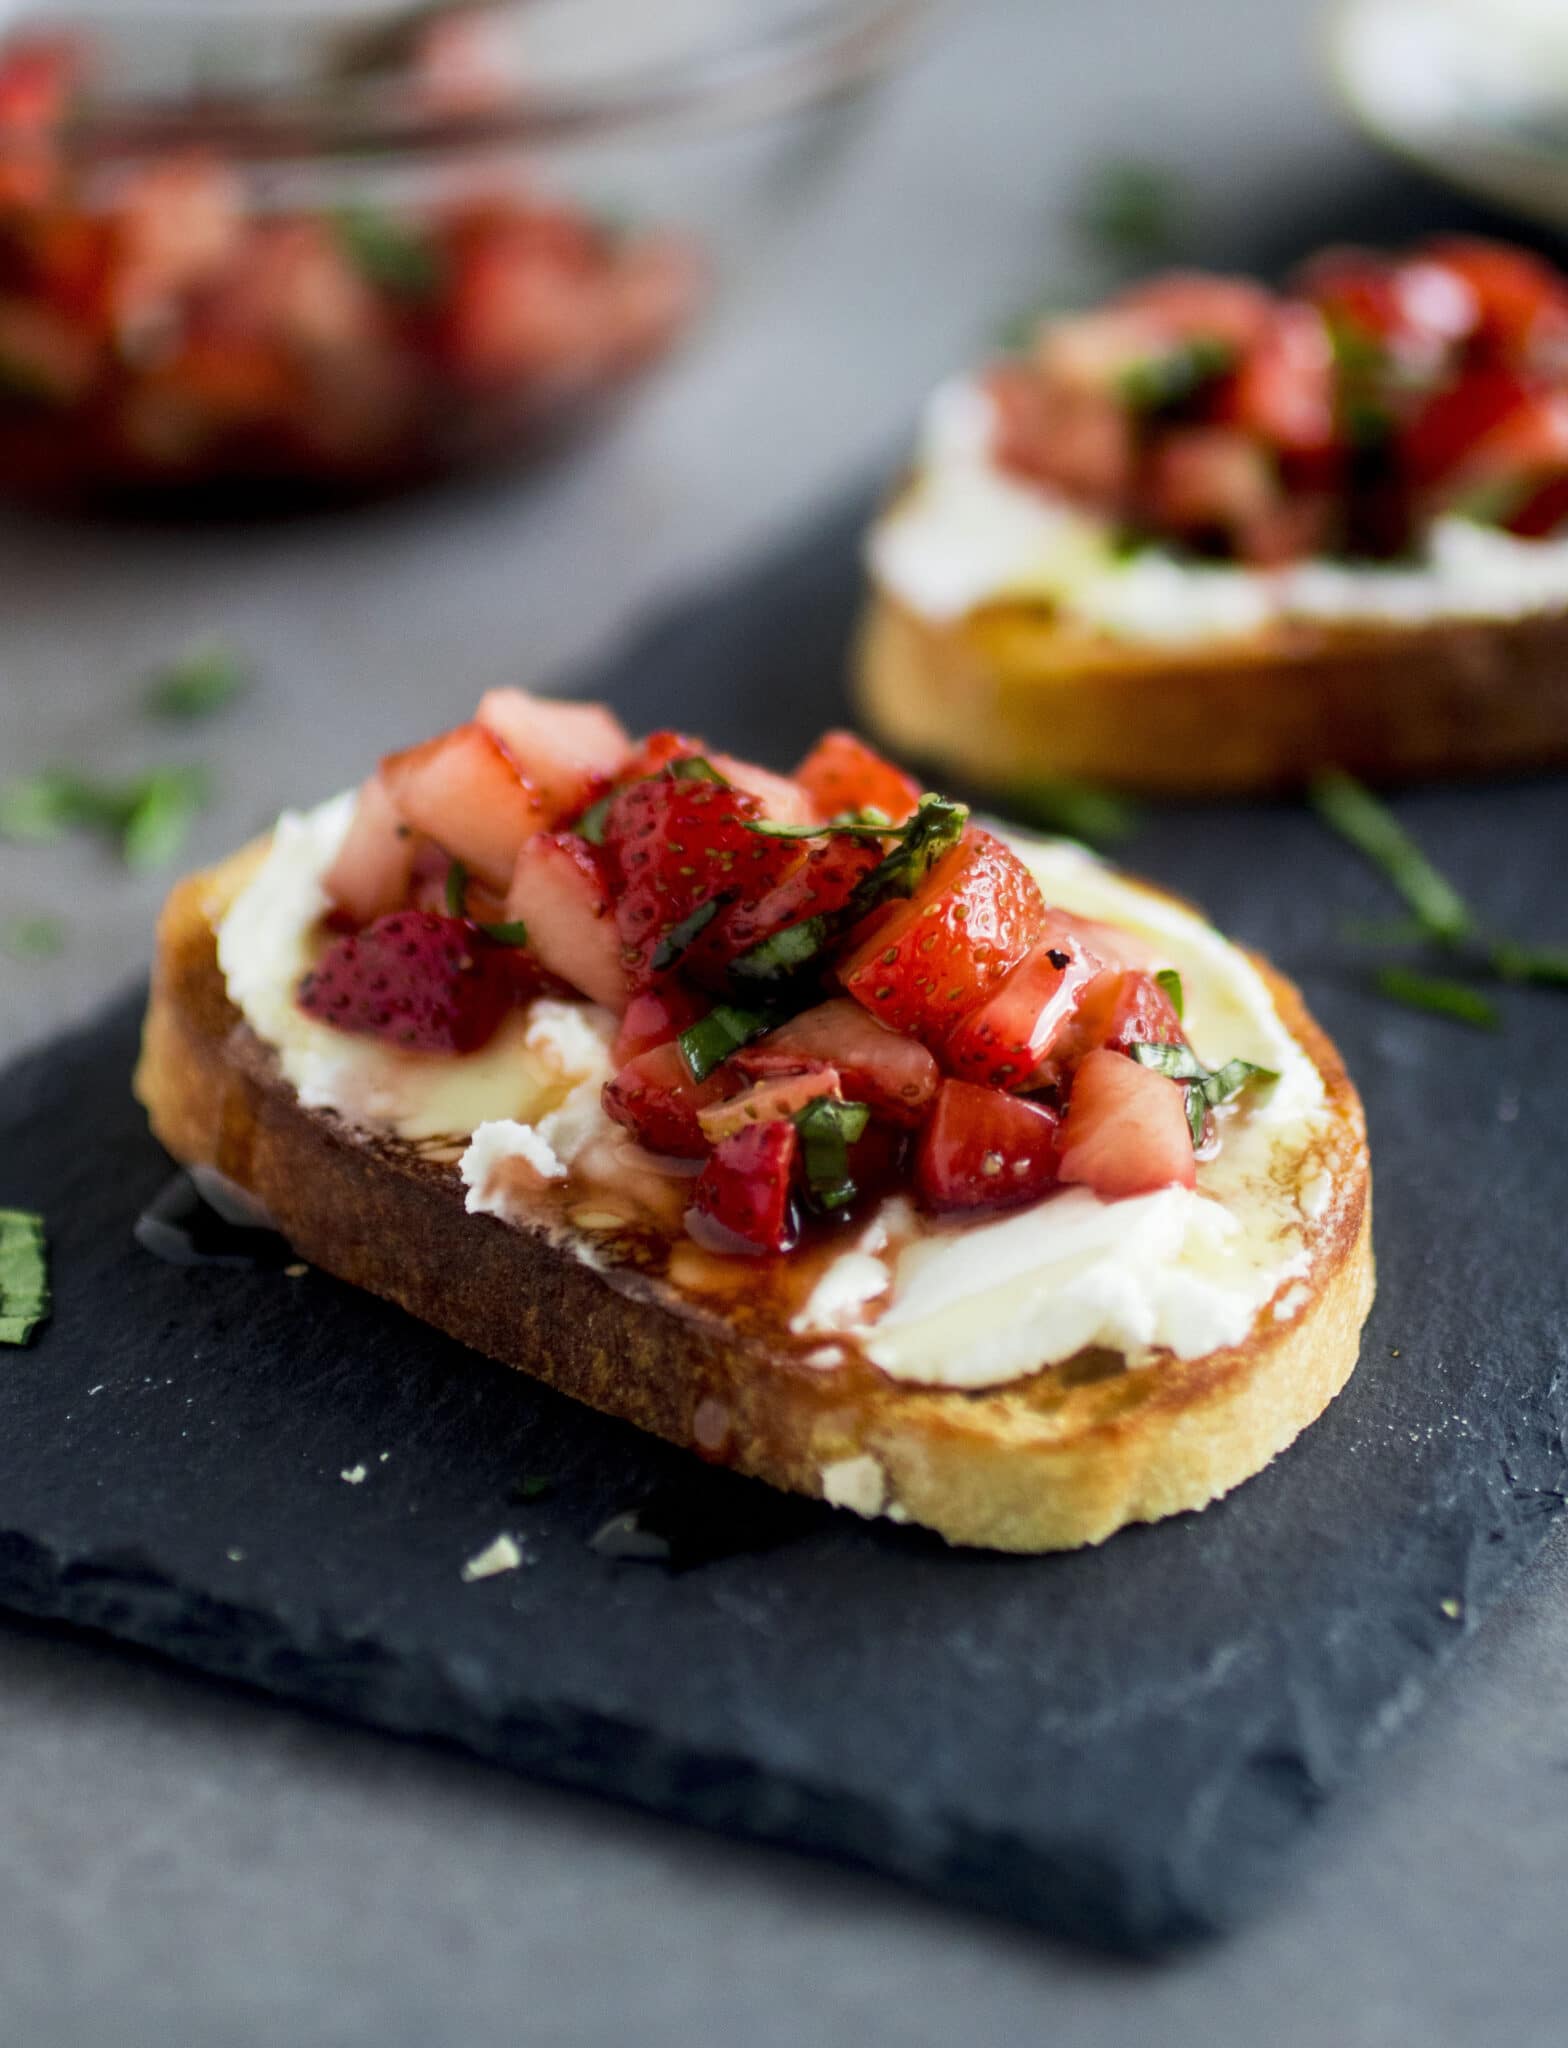 Crostini topped with goat cheese and strawberry basil salsa, sitting on a slate platter.